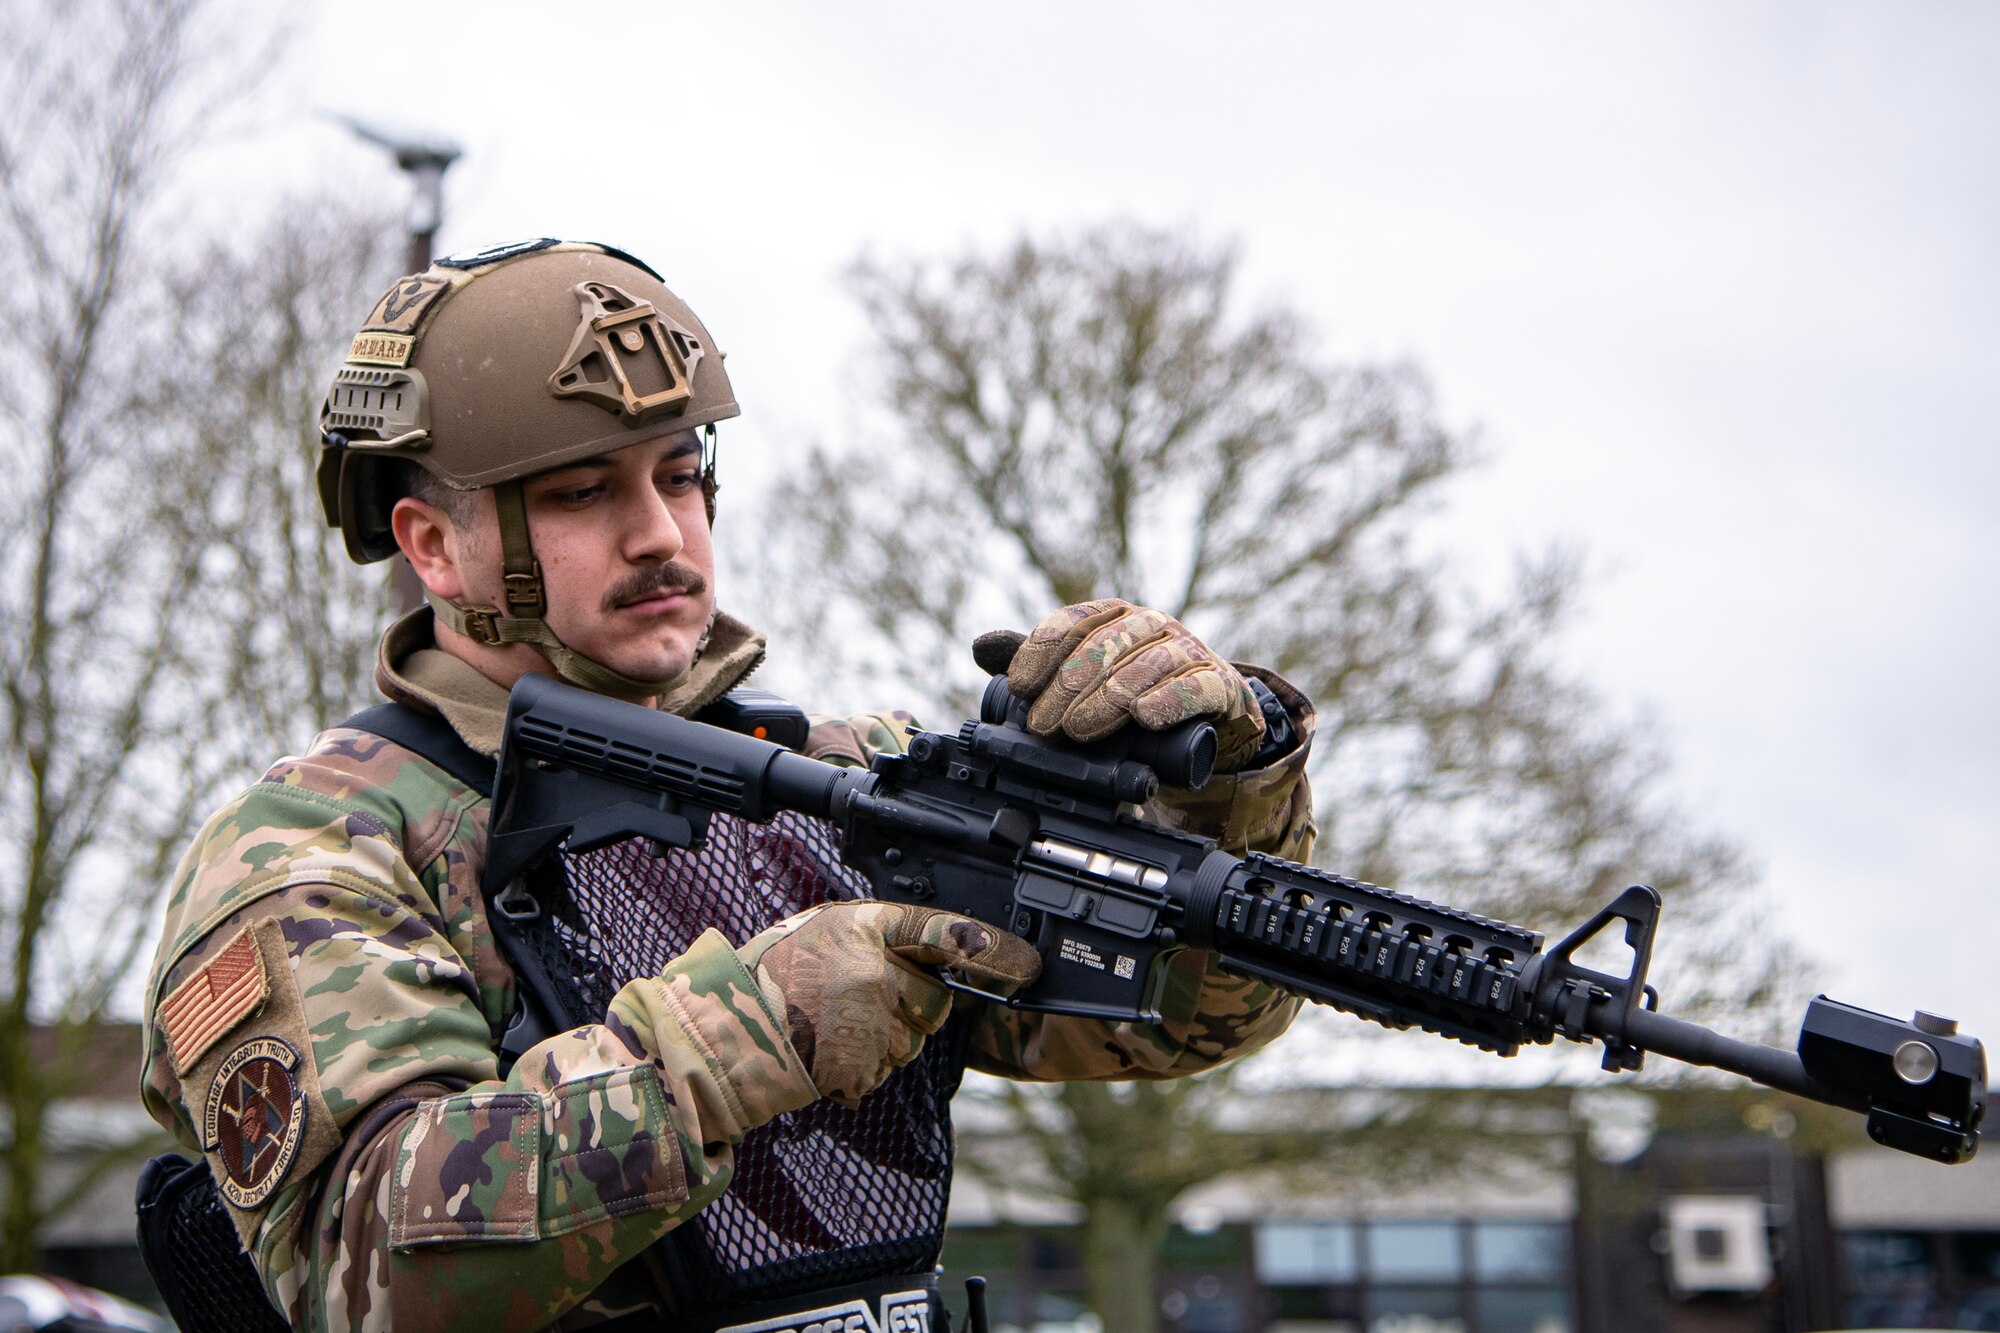 U.S. Air Force Staff Sgt. Andres Cabrera, 423d Security Forces Squadron flight sergeant, inspects his weapon during an exercise at RAF Alconbury, England, March 16, 2023. The exercise tested the 501st Combat Support Wing on overall readiness and ability to respond to an emergency situation. (U.S. Air Force photo by Staff Sgt. Eugene Oliver)